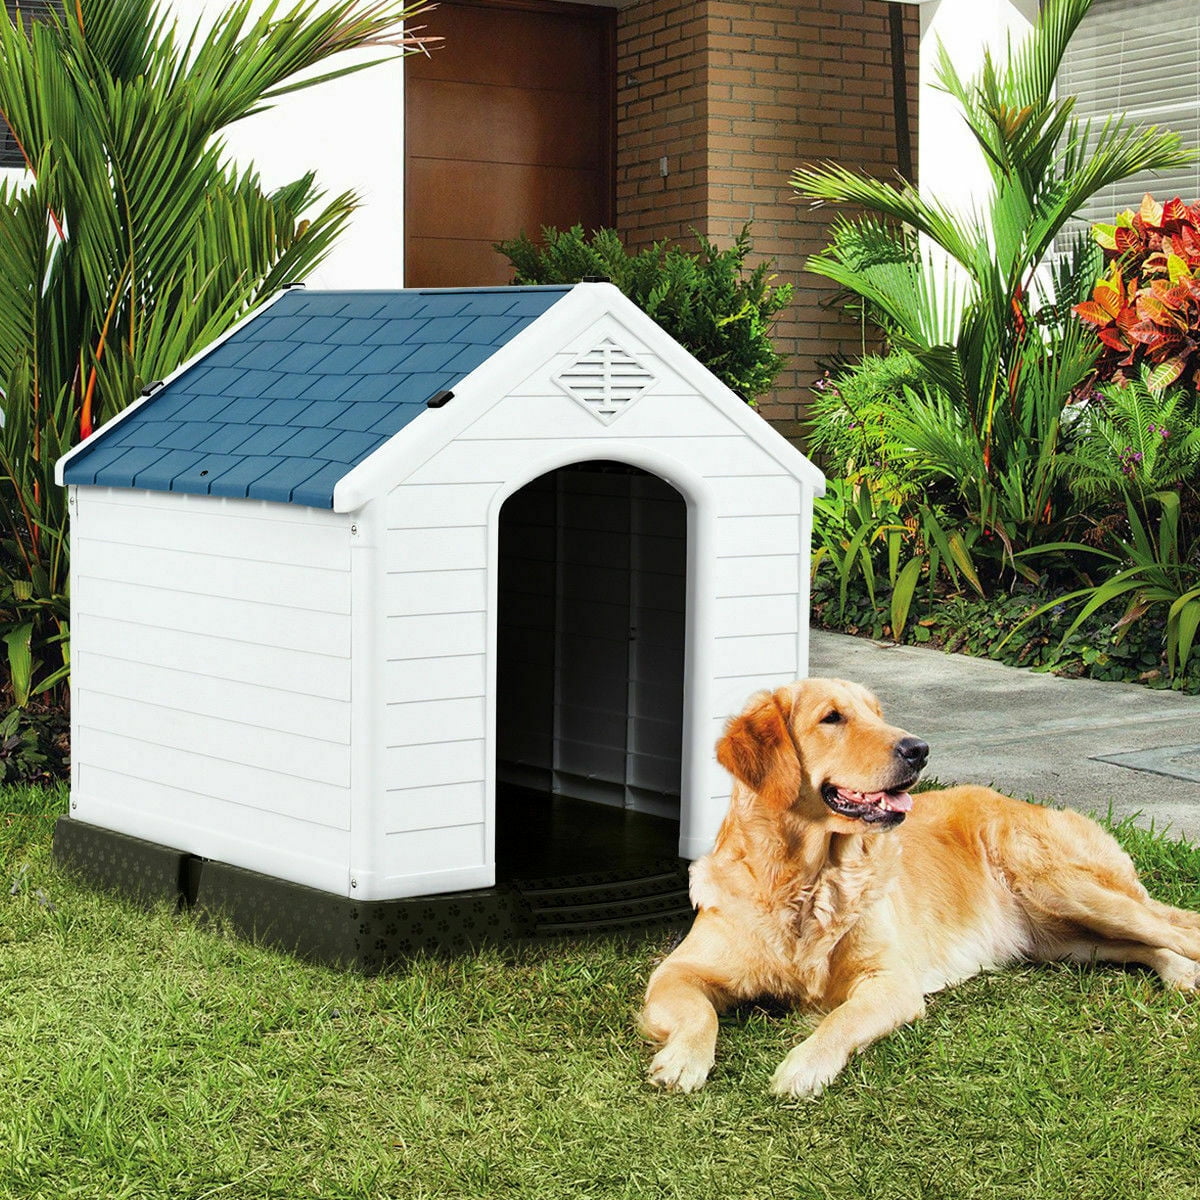 PETSITE Dog House Waterproof Puppy Kennel Plastic Pet Dog Shelter for Indoor Outdoor Use